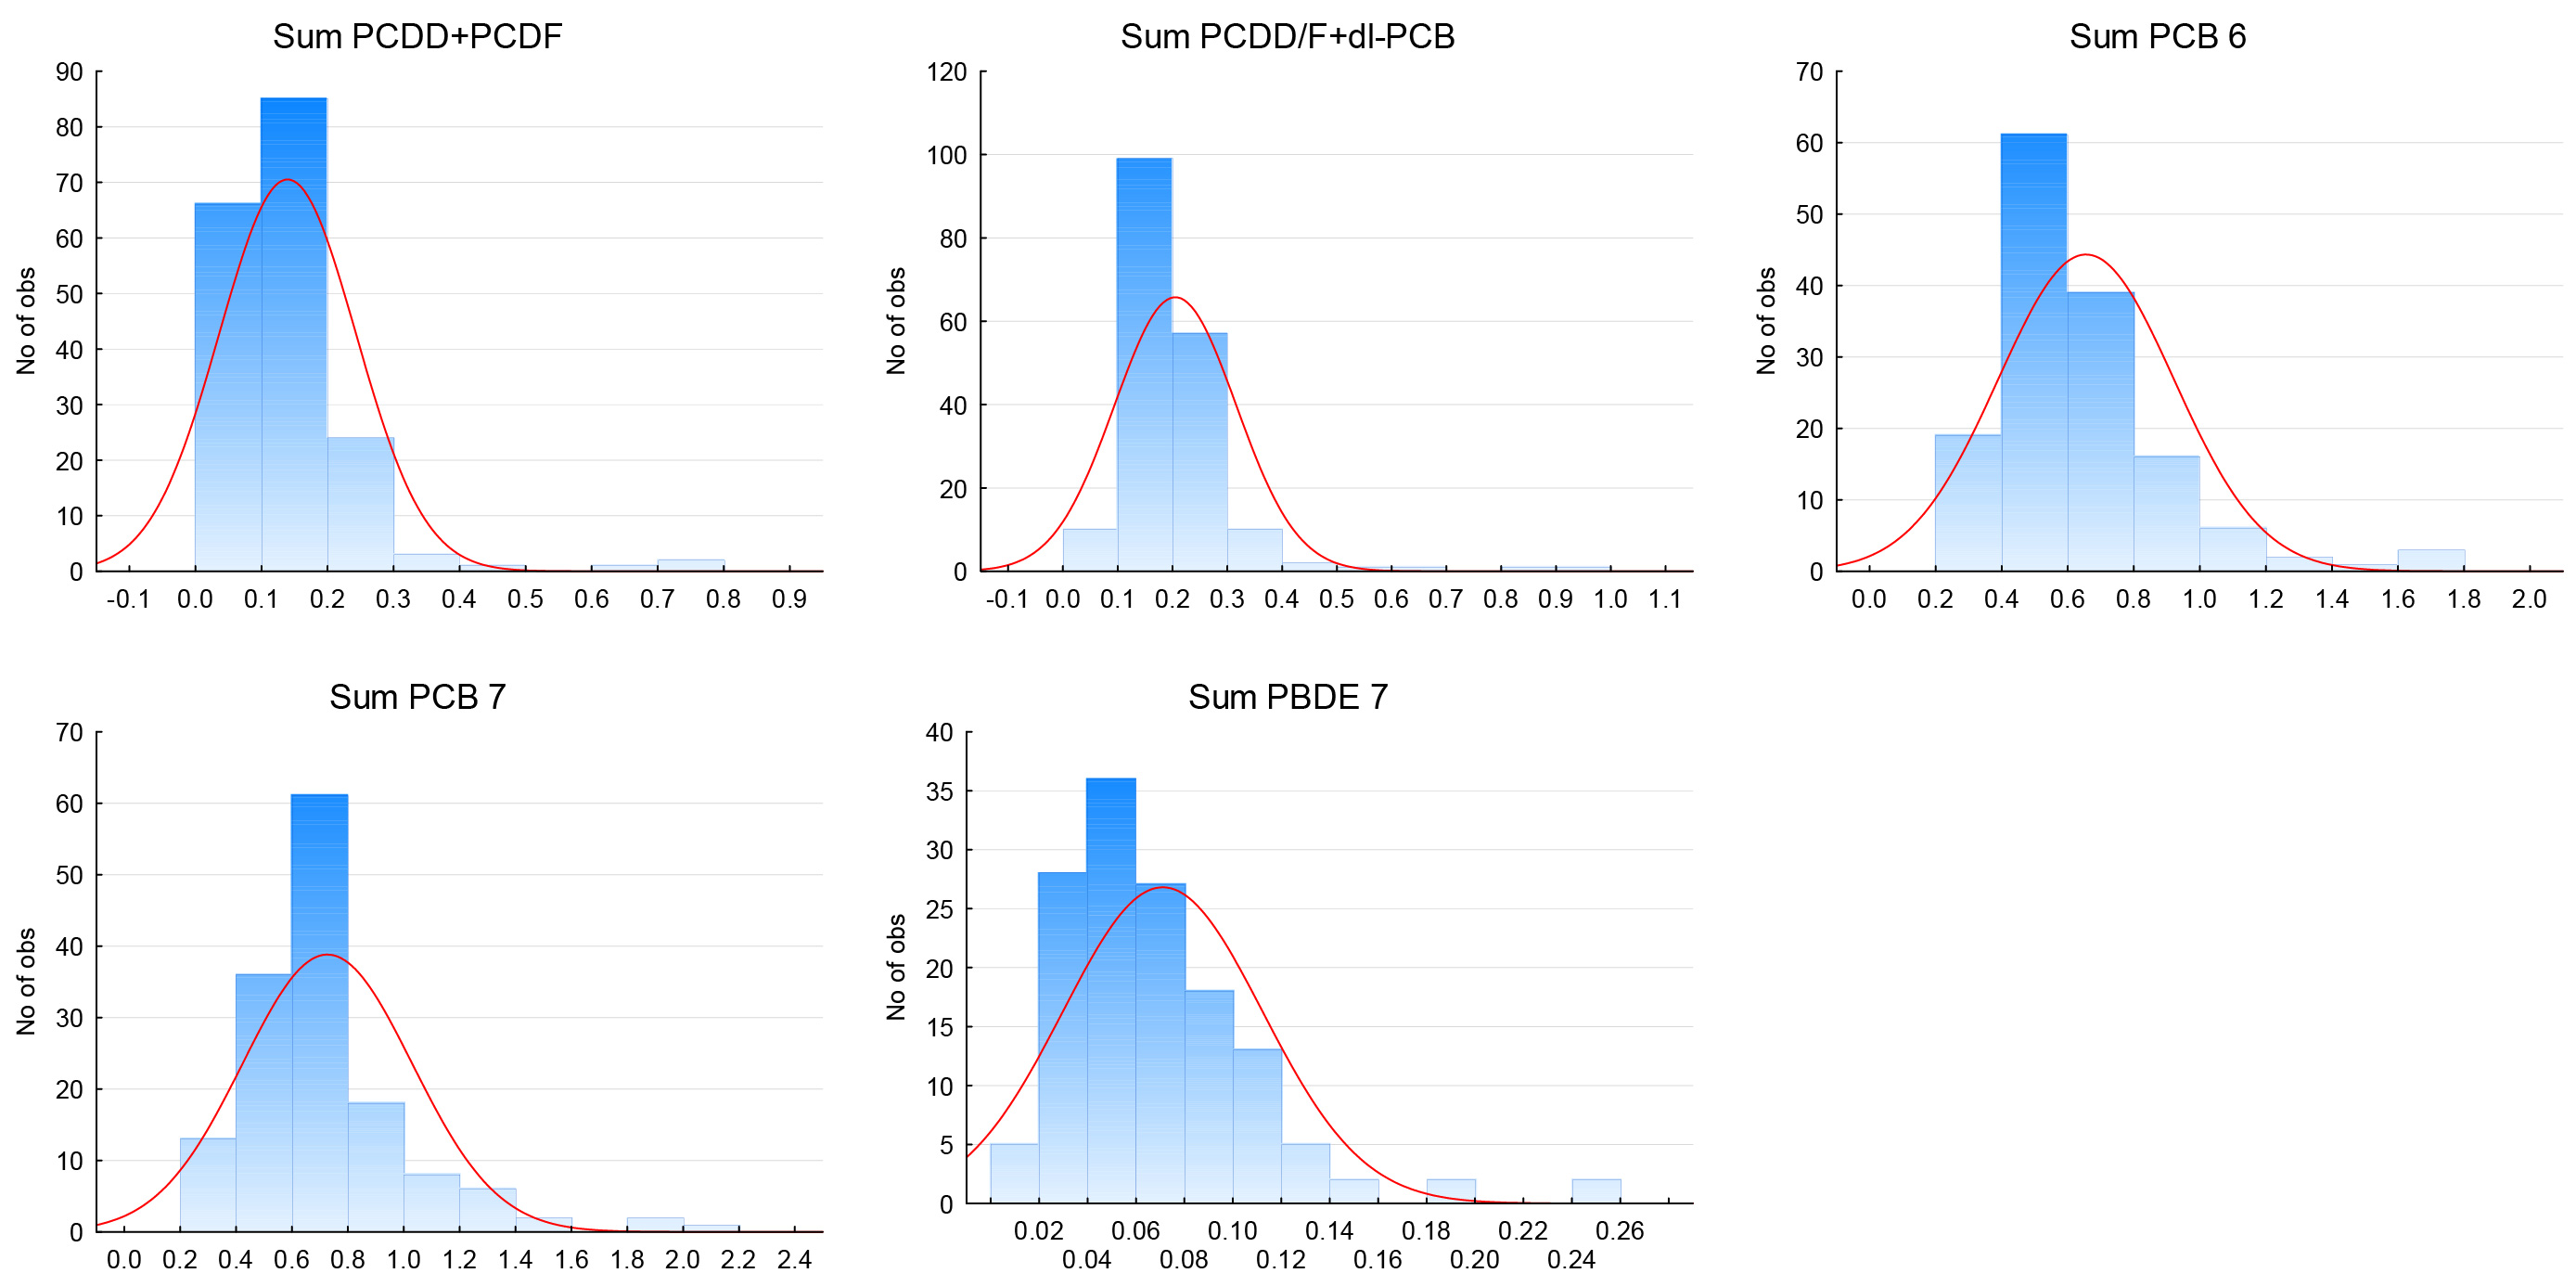 Figur 2. Histograms showing the distribution of concentrations (ng WHO-2005-TEQ/kg wet weight) of sum dioxins/furans (PCDD/F), sum PCDD/F + sum non-ortho PCB and mono-ortho PCB (PCDD/F+dl-PCB), and concentrations (Âµg/kg) of PCB6, PCB7 and PBDE7 in mussels (Mytilus edulis) from the shellfish monitoring program between 2005 and 2014